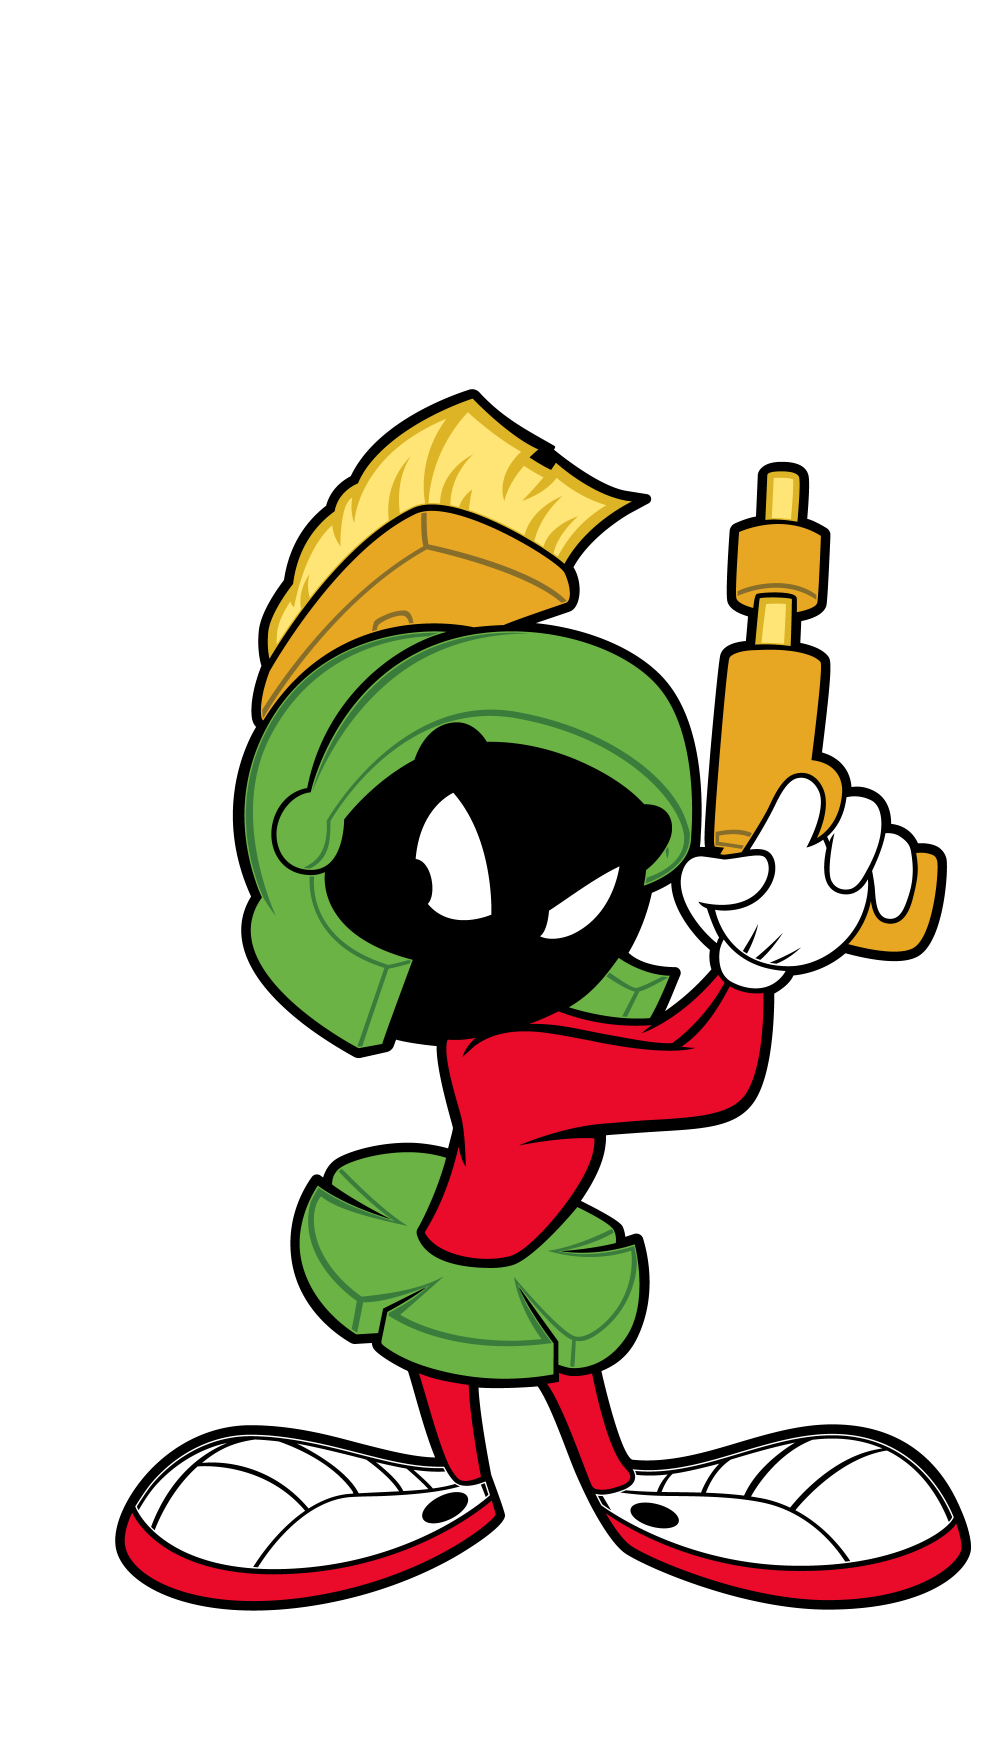 FiGPiN Looney Tunes Marvin the Martian #650